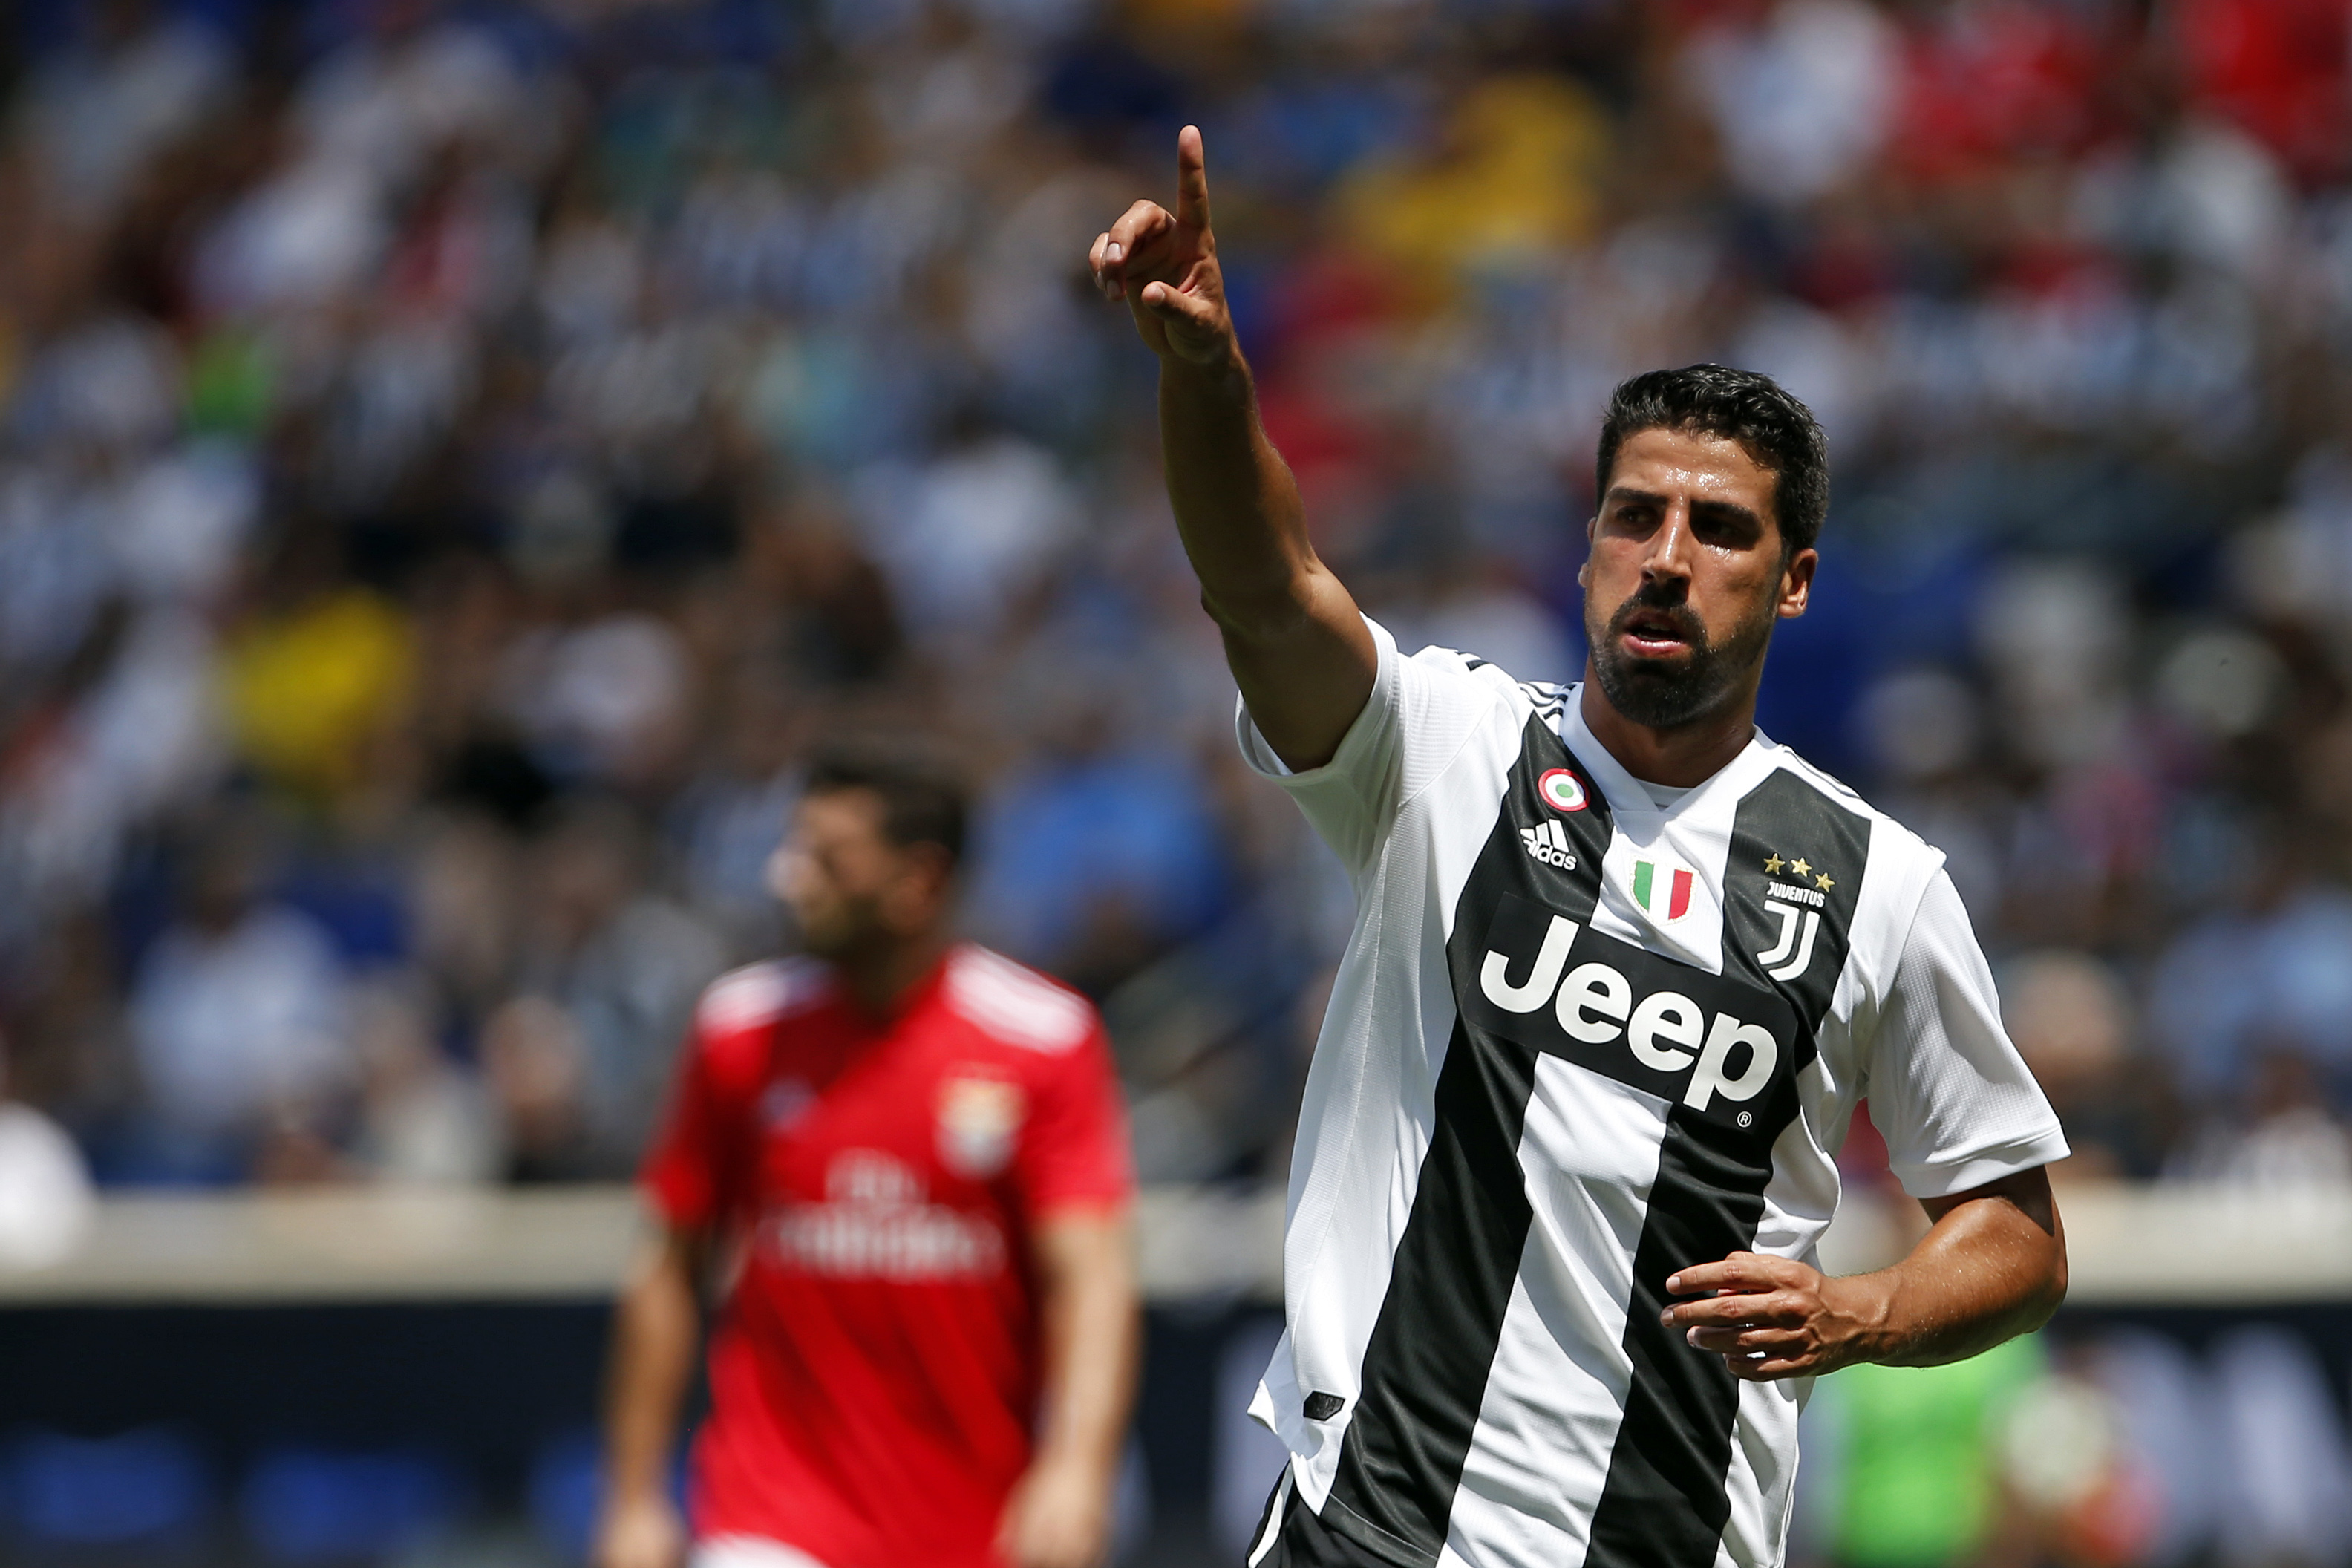 HARRISON, NJ - JULY 28: Sami Khedira #6 of Juventus gestures against Benfica during the International Champions Cup 2018 match between Benfica and Juventus at Red Bull Arena on July 28, 2018 in Harrison, New Jersey. (Photo by Adam Hunger/Getty Images)